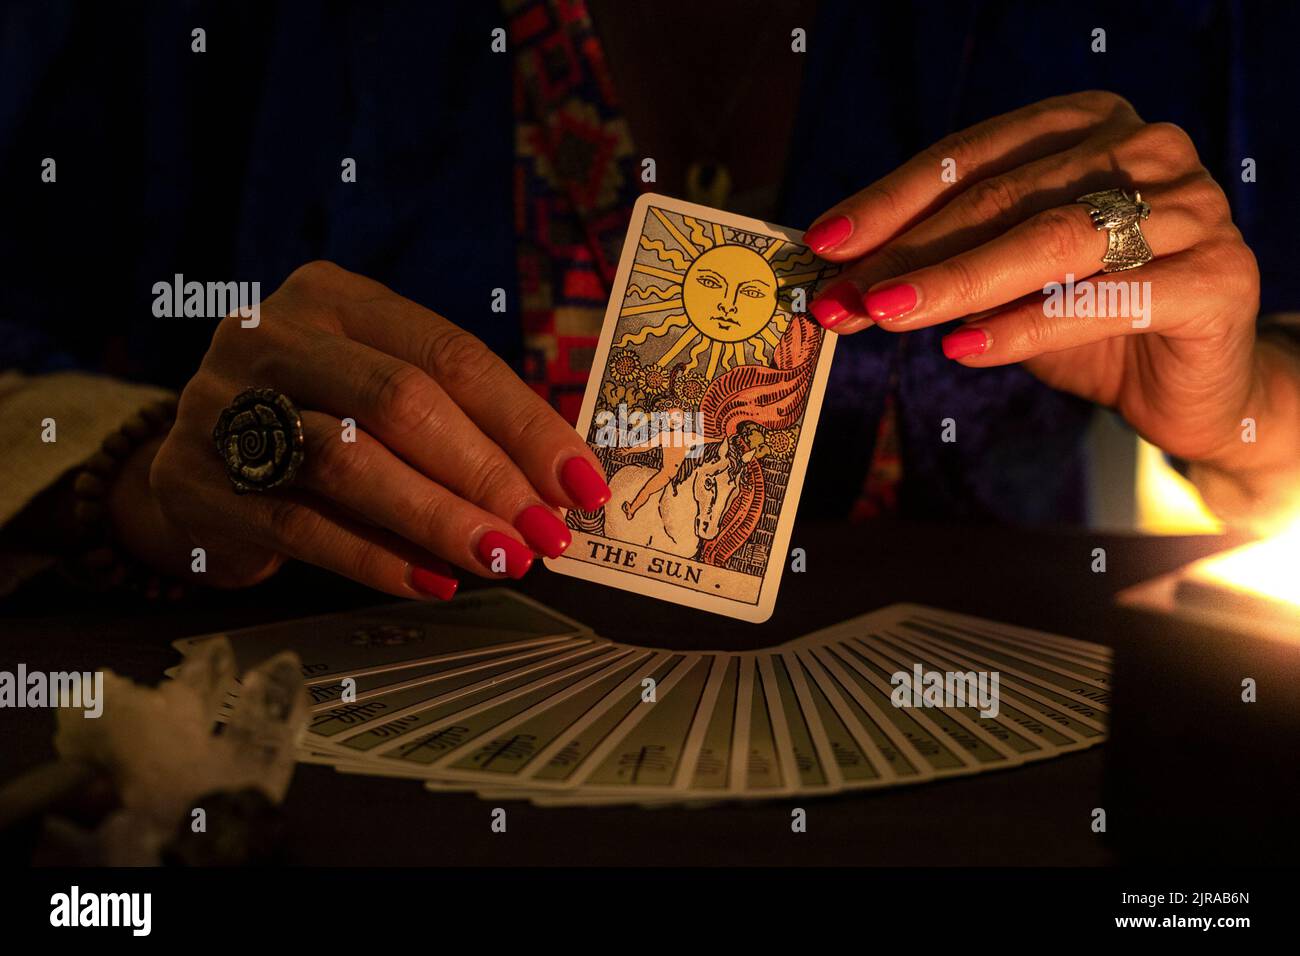 Fortune teller hands showing The Sun tarot card, symbol of positivity, during a reading. Close-up with candle light, moody atmosphere. Stock Photo